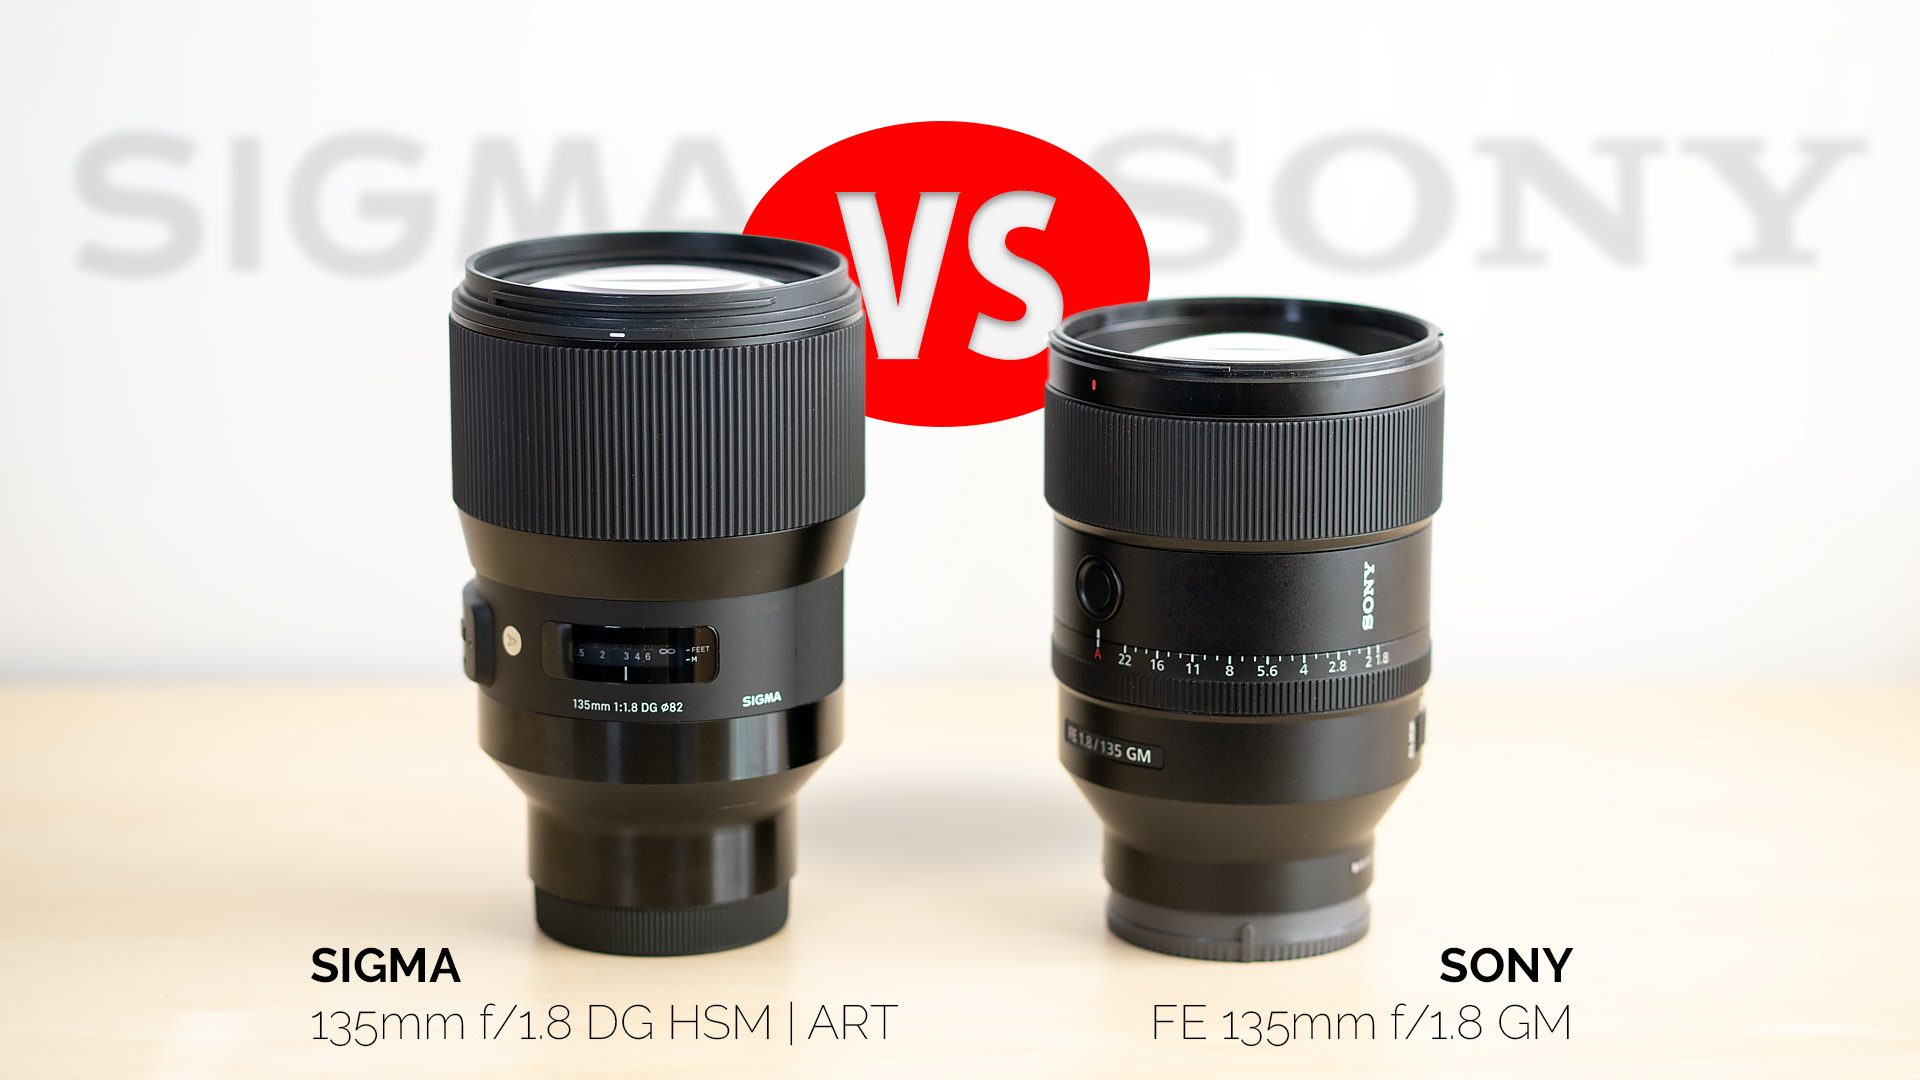 Lede Image of Sigma and Sony 135mm f/1.8 lenses side by side